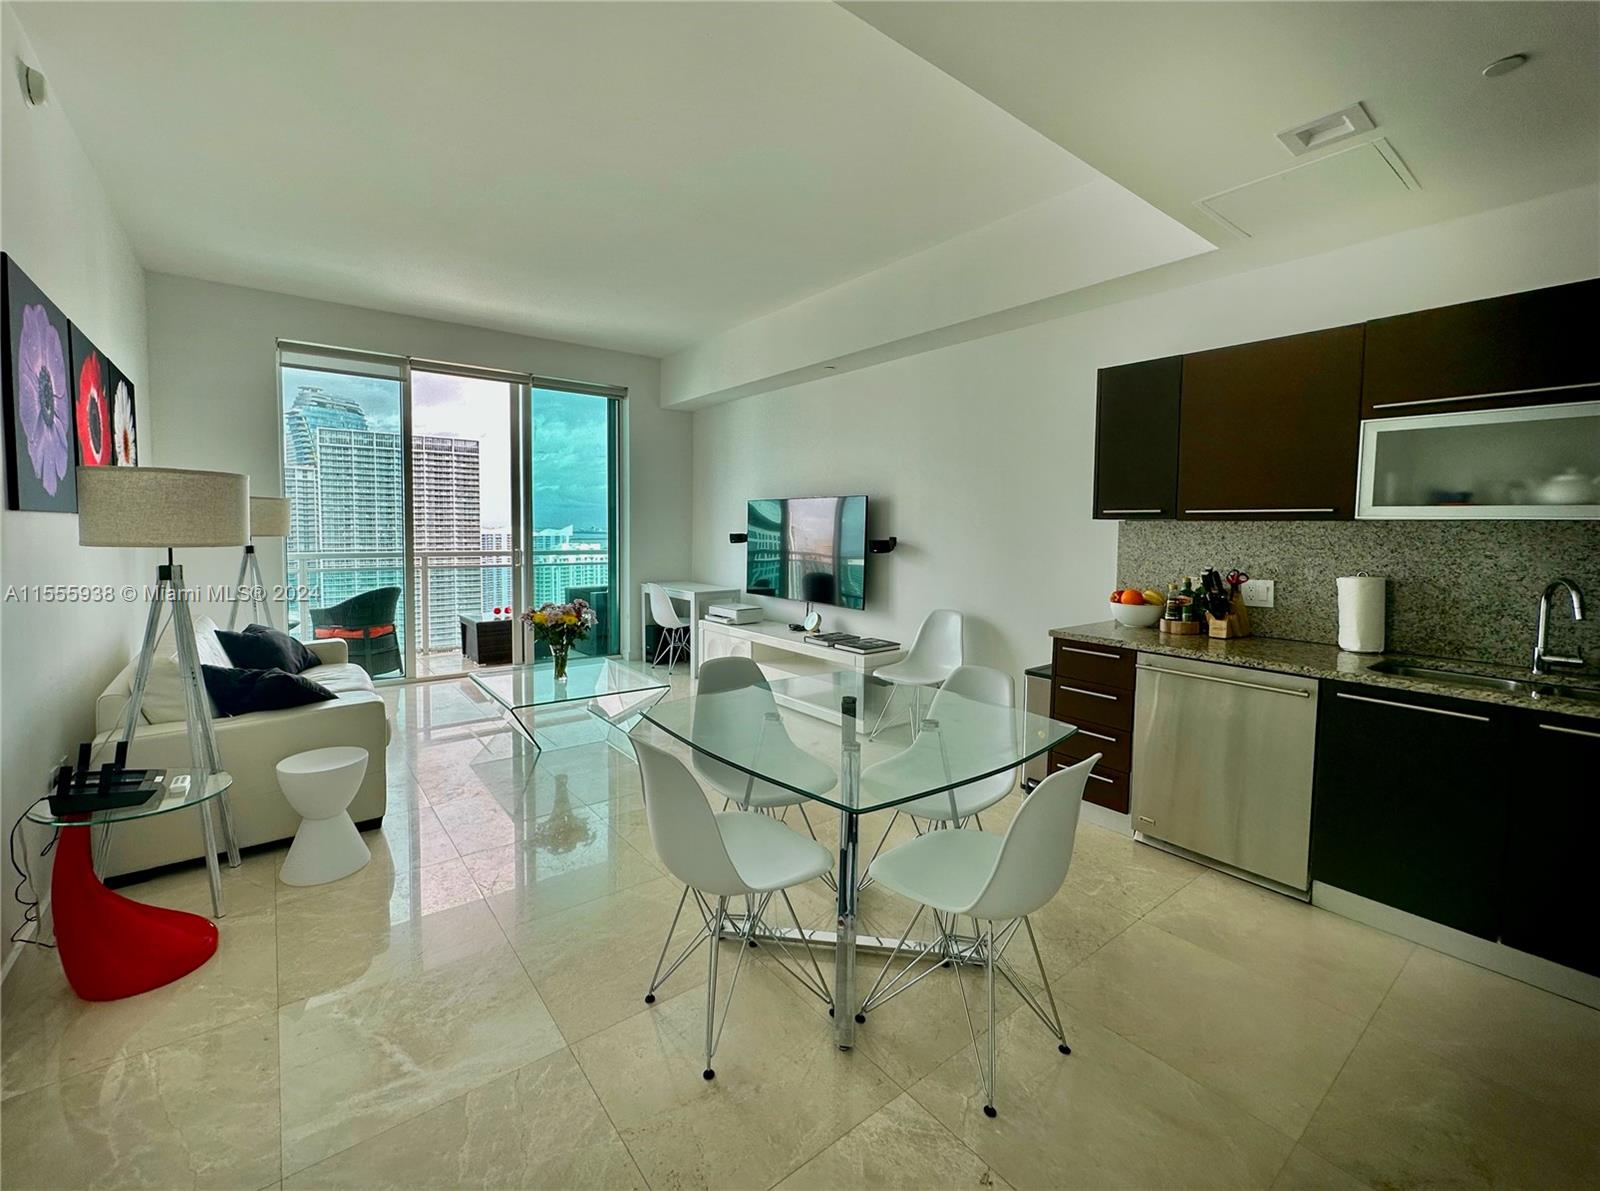 UPSCALE LUXURY FURNISHED 1 BEDROOM IN A CENTRAL LOCATION IN BRICKELL. LARGE BALCONY AND GREAT VIEWS ON THE WATER. MARBLE FLOOR ALL OVER THIS UNIT. FULLY EQUIPPED KITCHEN WITH ITALIAN CABINETS. WASHER/DRYER AND DISHWASHER IN THE UNIT. LARGE BEDROOM WITH KING SIZE BED. 2 TVs. ENTIRELY FURNISHED JUST BRING YOUR TOOTHBRUSH. LUXURY BUILDING WITH ALL AMENITIES. 2 INFINITY POOLS ON A HUGE POOLDECK. 24/7 FRONTDESK AND SECURITY. JACCUZZI. GREAT GYM. 1 ASSIGNED PARKING SPACE. BUSINESS CENTER. CENTRAL LOCATION. WALK EVERYWHERE. 4 MINUTES TO MARY BRICKELL VILLAGE AND BRICKELL CITY CENTER. 200 RESTAURANTS AT LESS THAN 5 MINUTES WALK